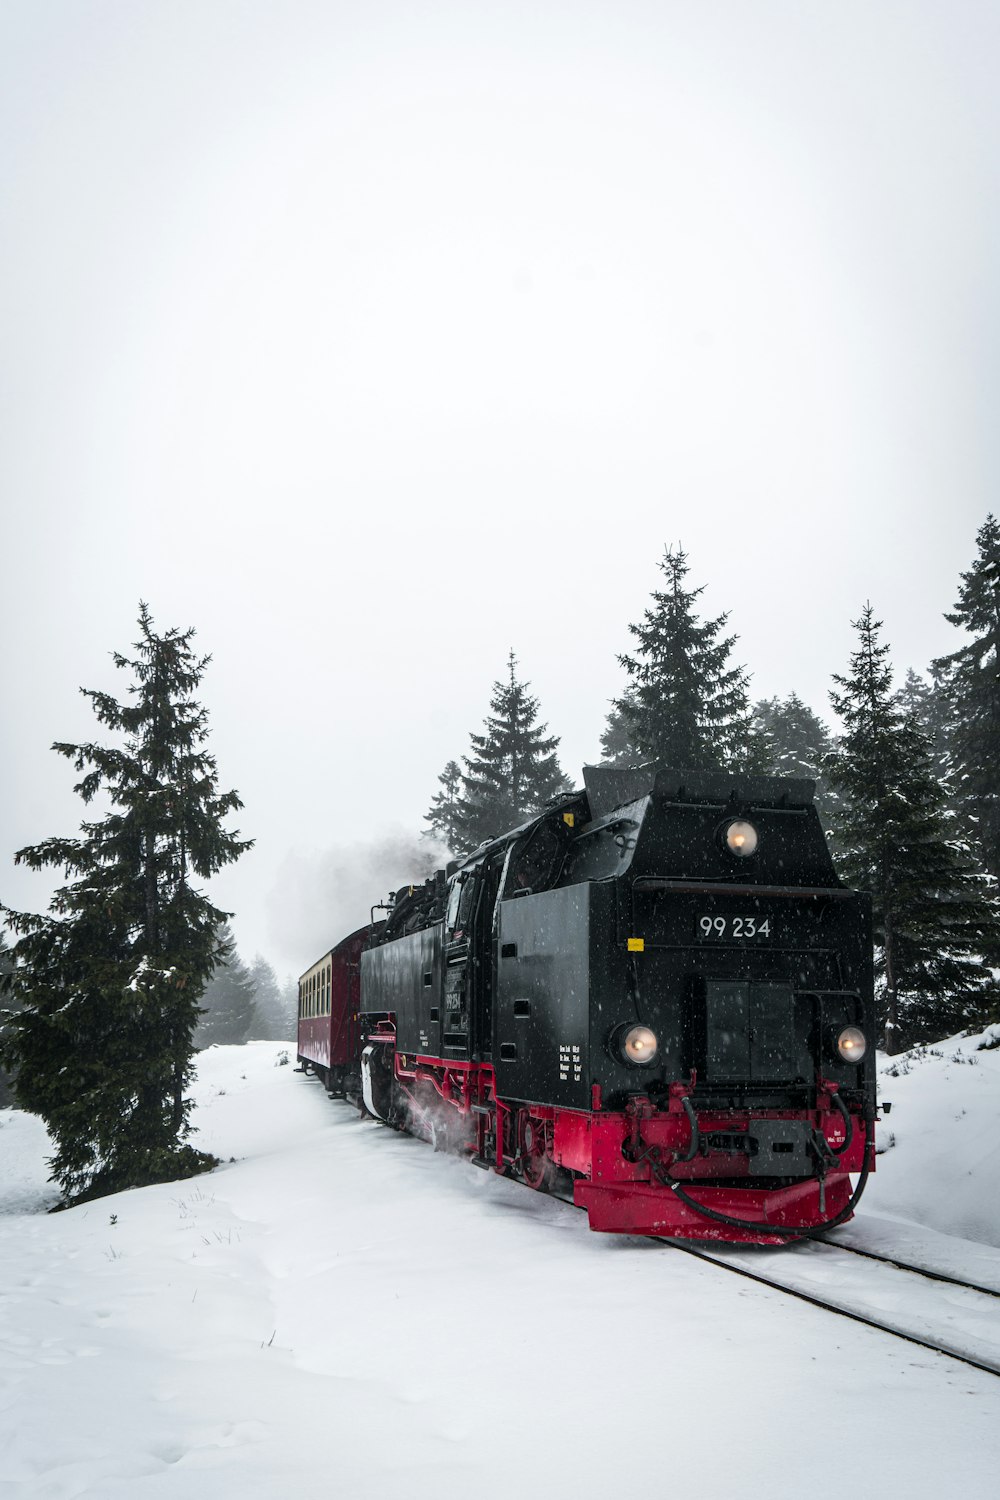 red and black train on snow covered ground during daytime